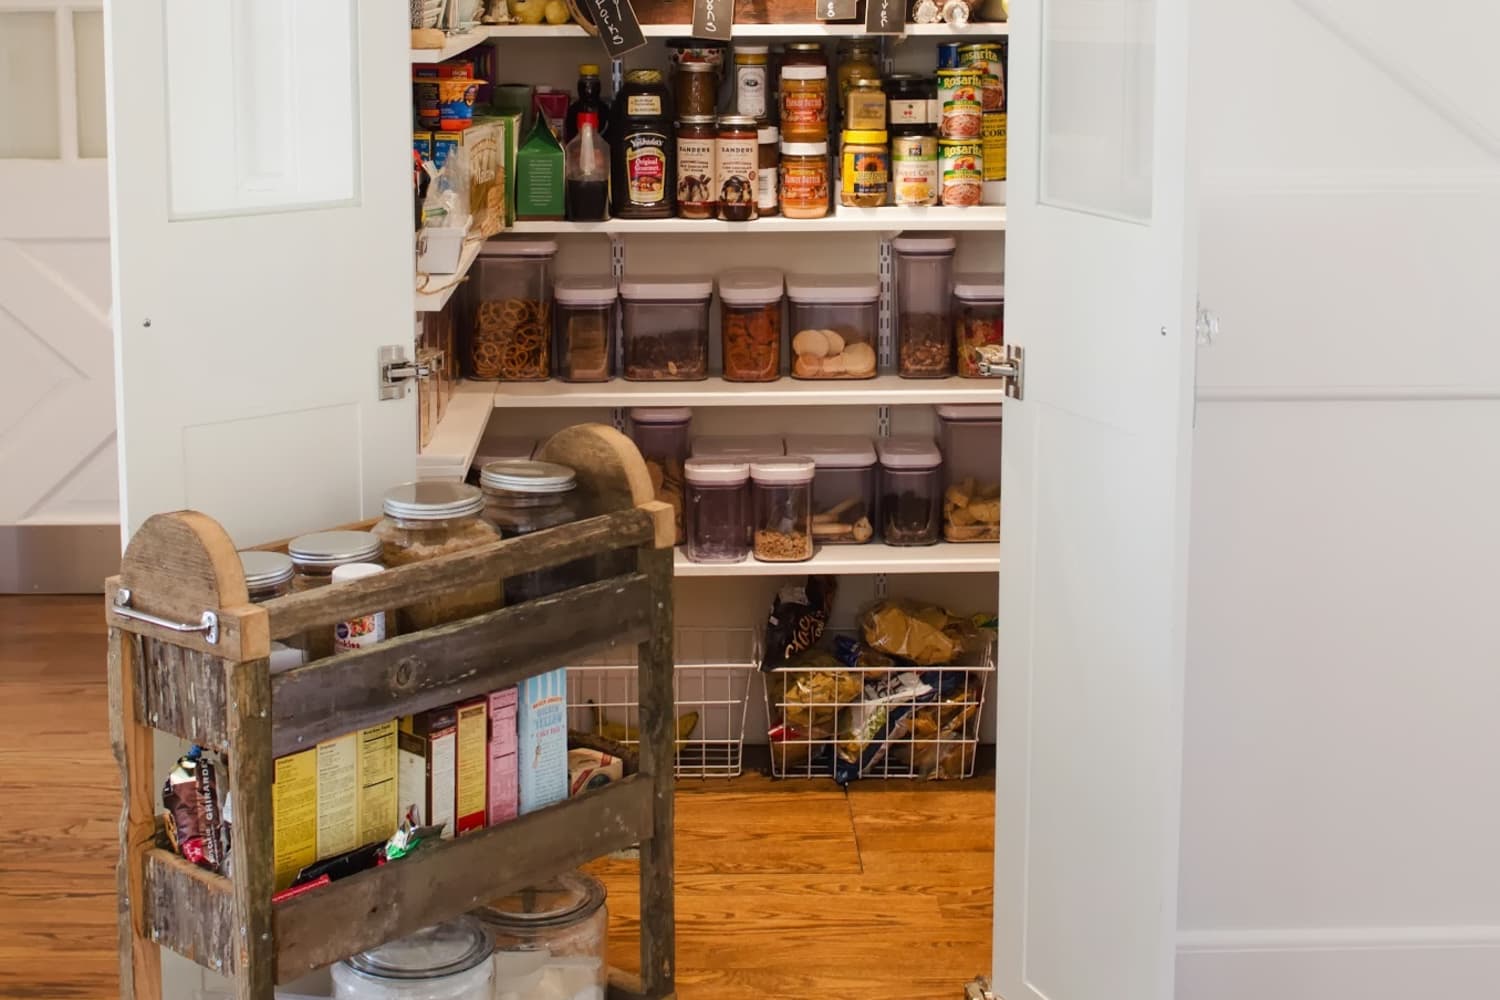 3 Ideas to Steal from This Under-the-Stairs Pantry | The Kitchn